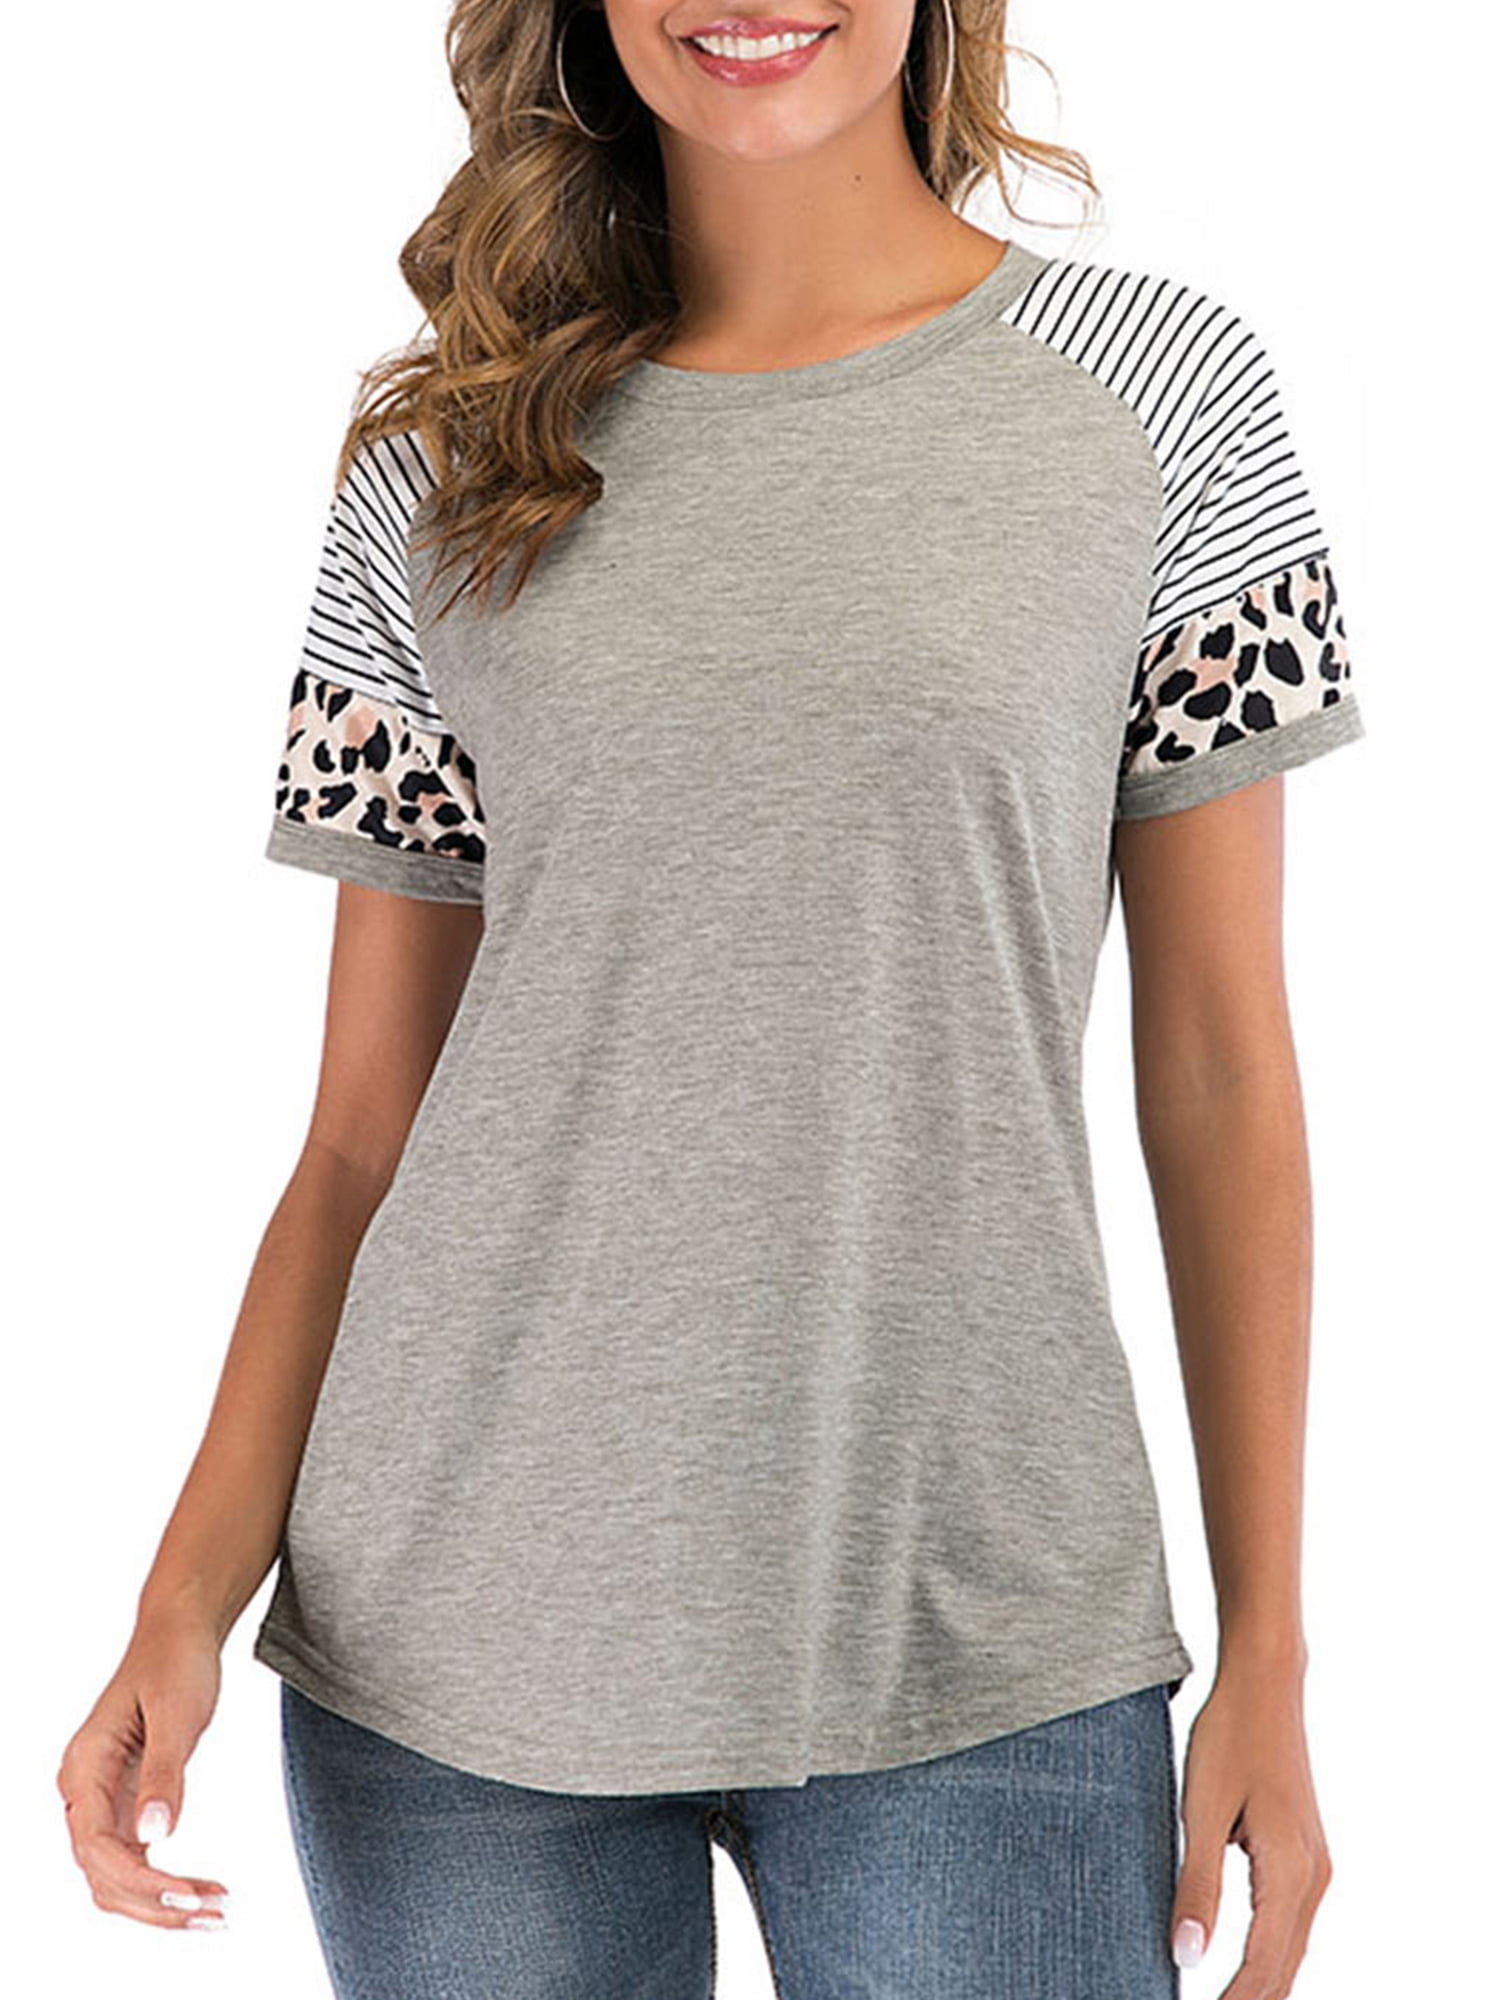 Women's Faith Over Fear Tshirt Leopard Print Color Block Tunic Round Neck Long Sleeve Shirts Striped Blouses Tops